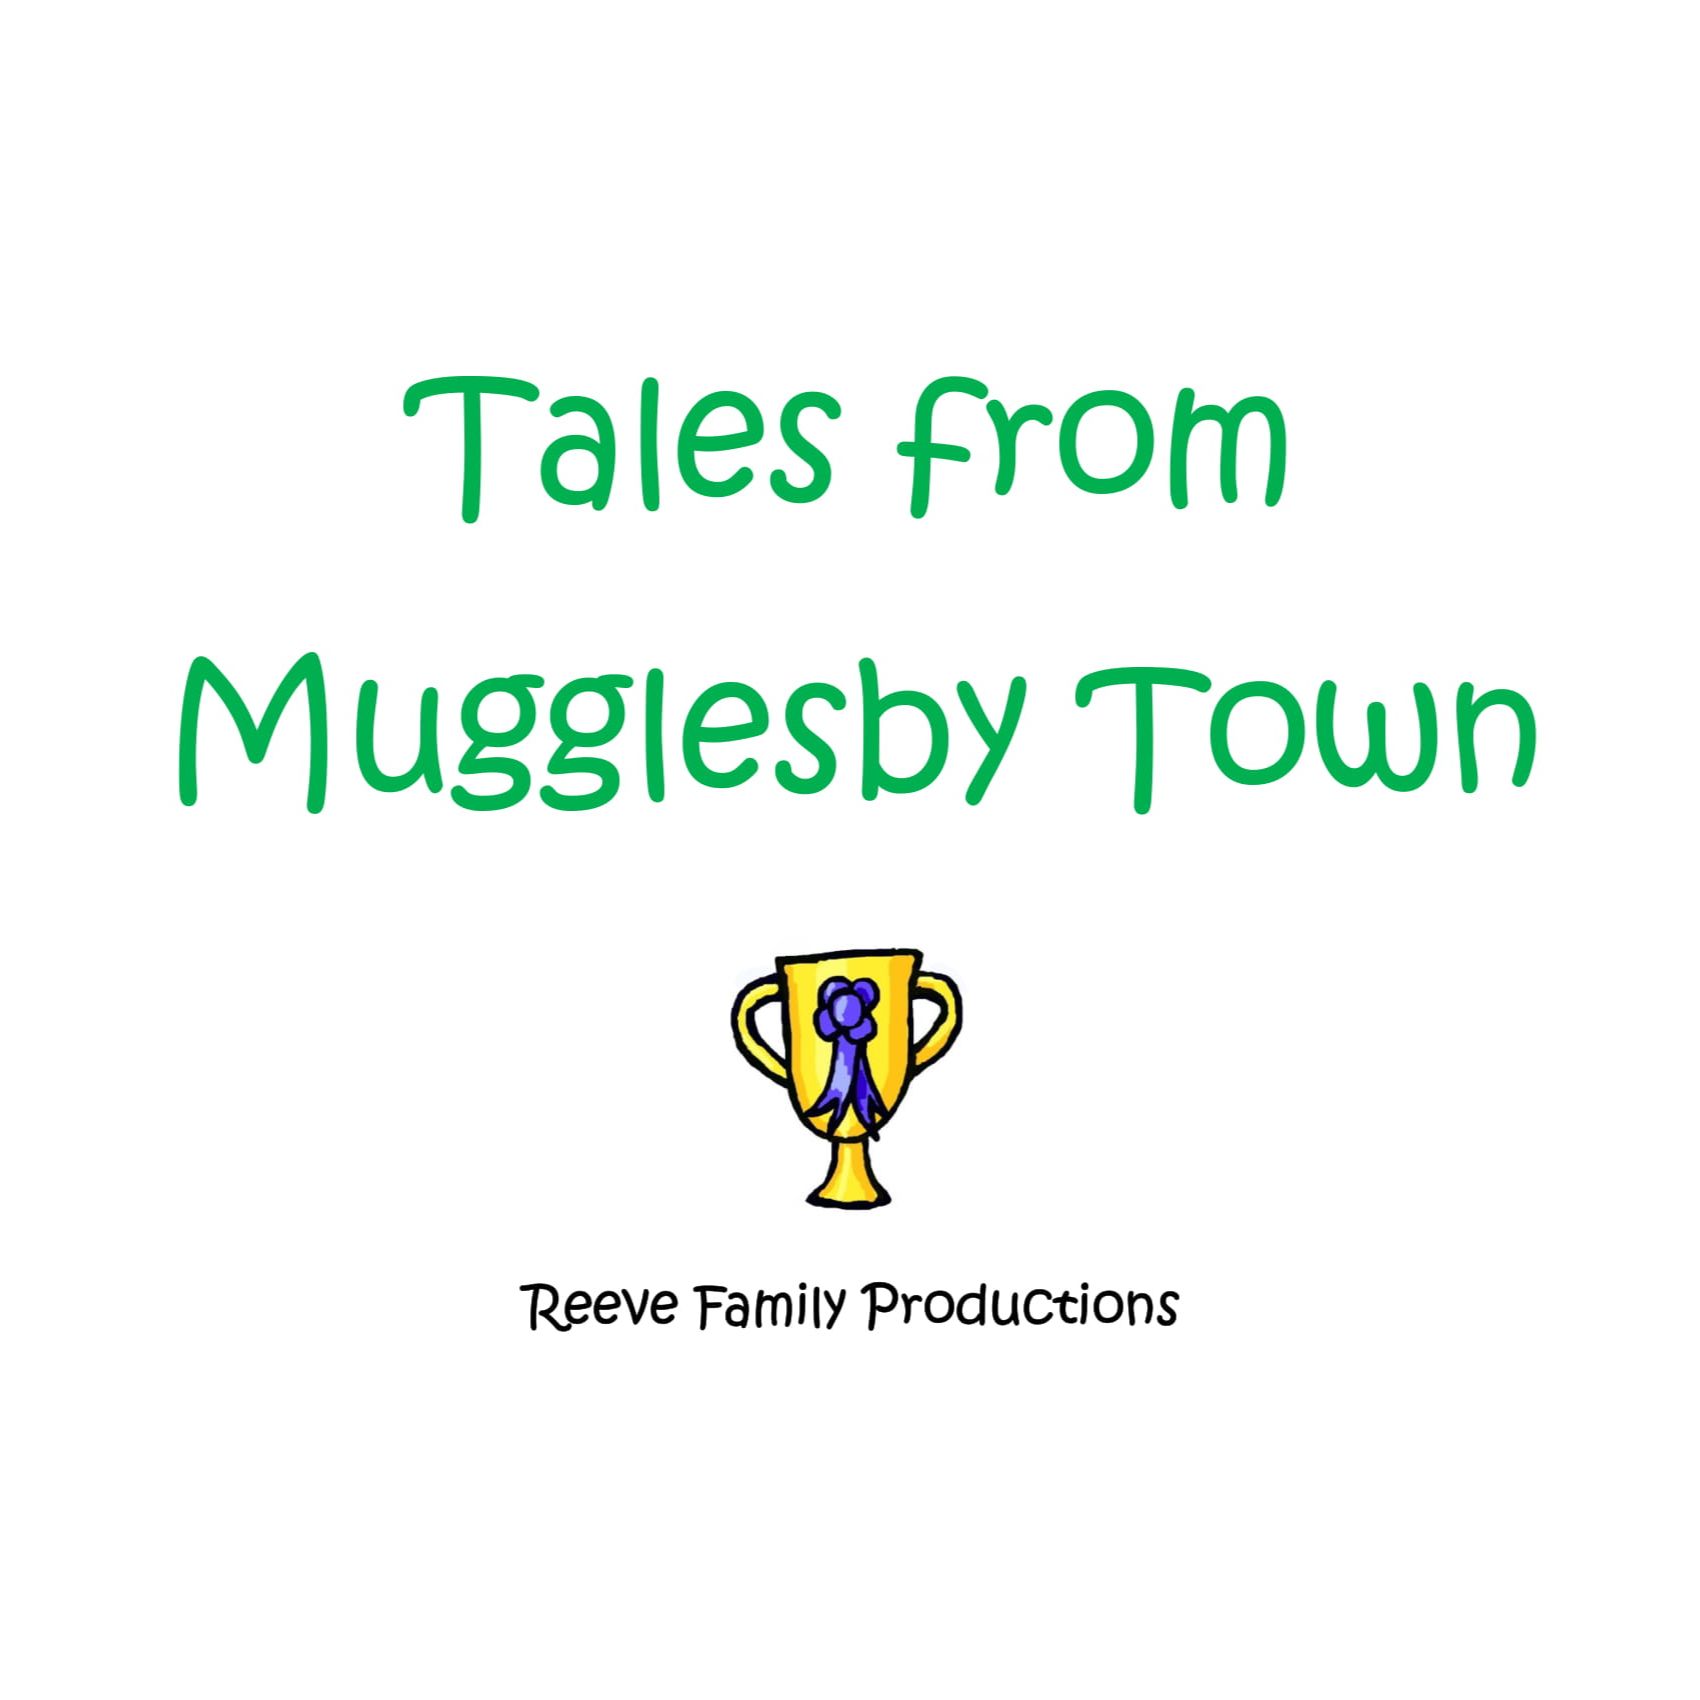 Tales from Mugglesby Town